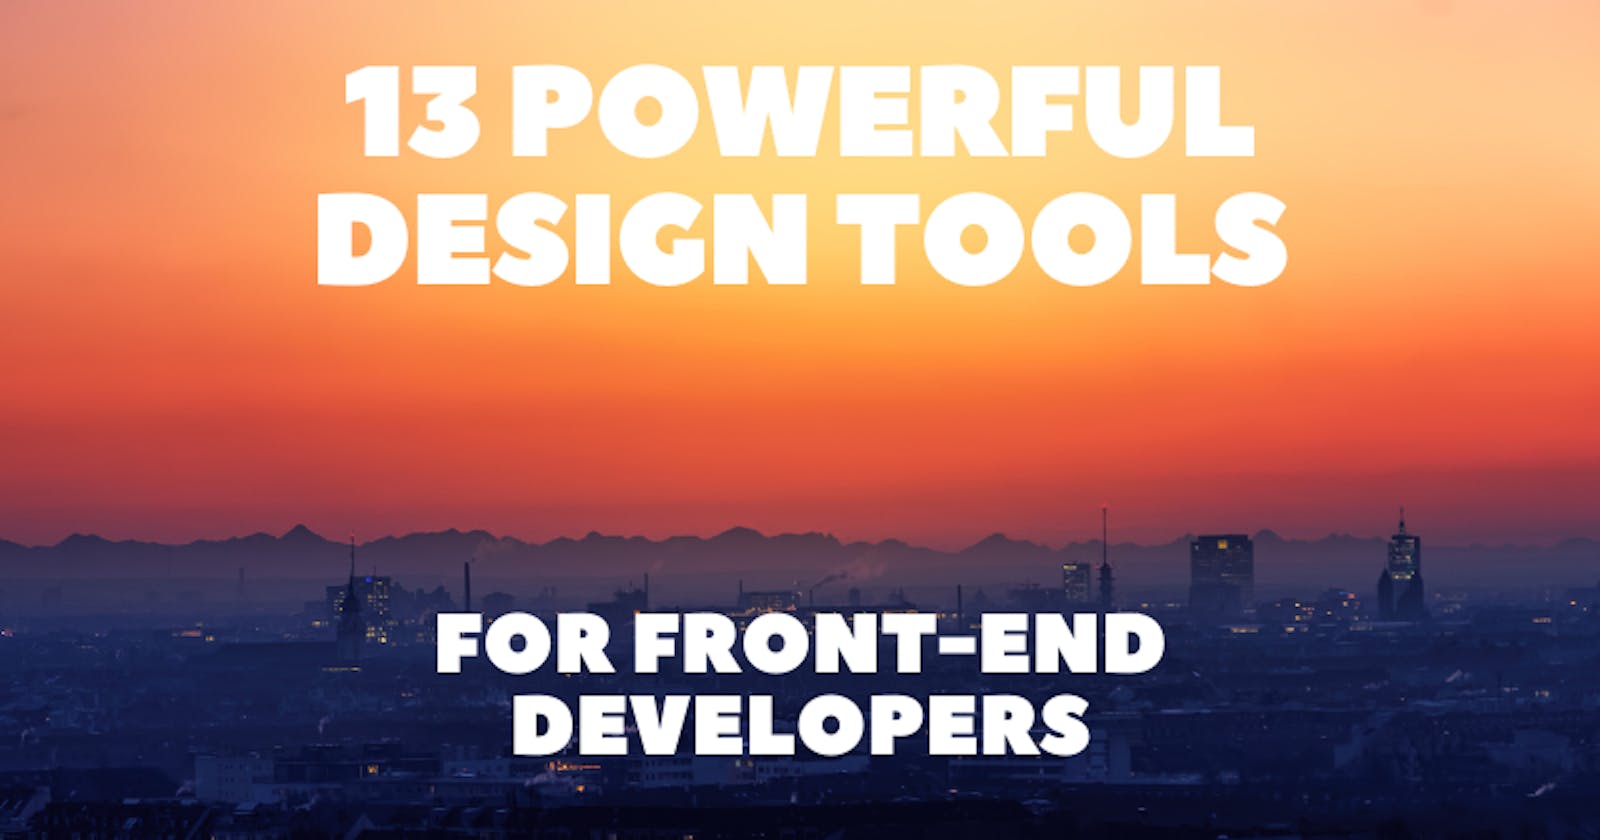 13 Powerful Design Tools for Front-end Developers ✨💯